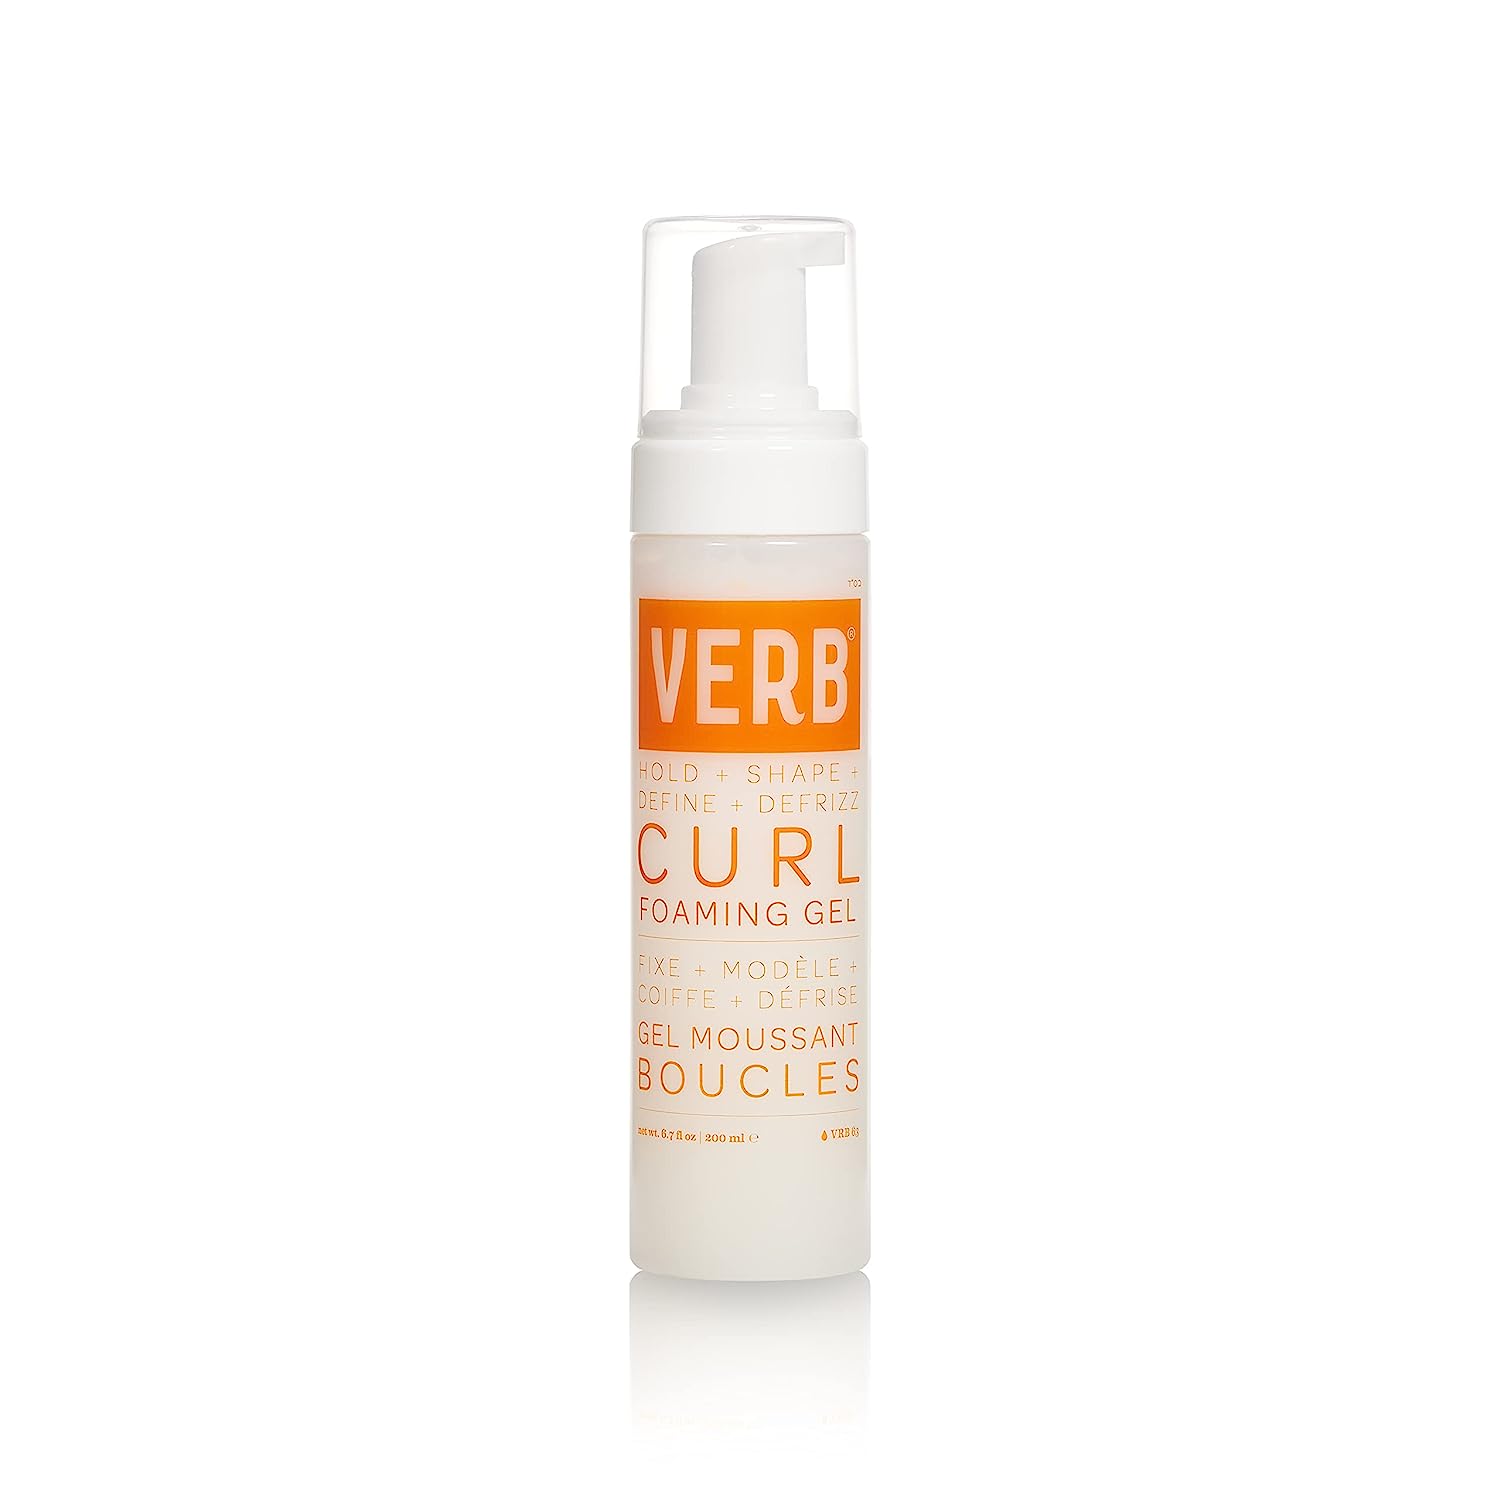 VERB Curl Foaming Gel – Frizz Control Mousse for Curl [...]